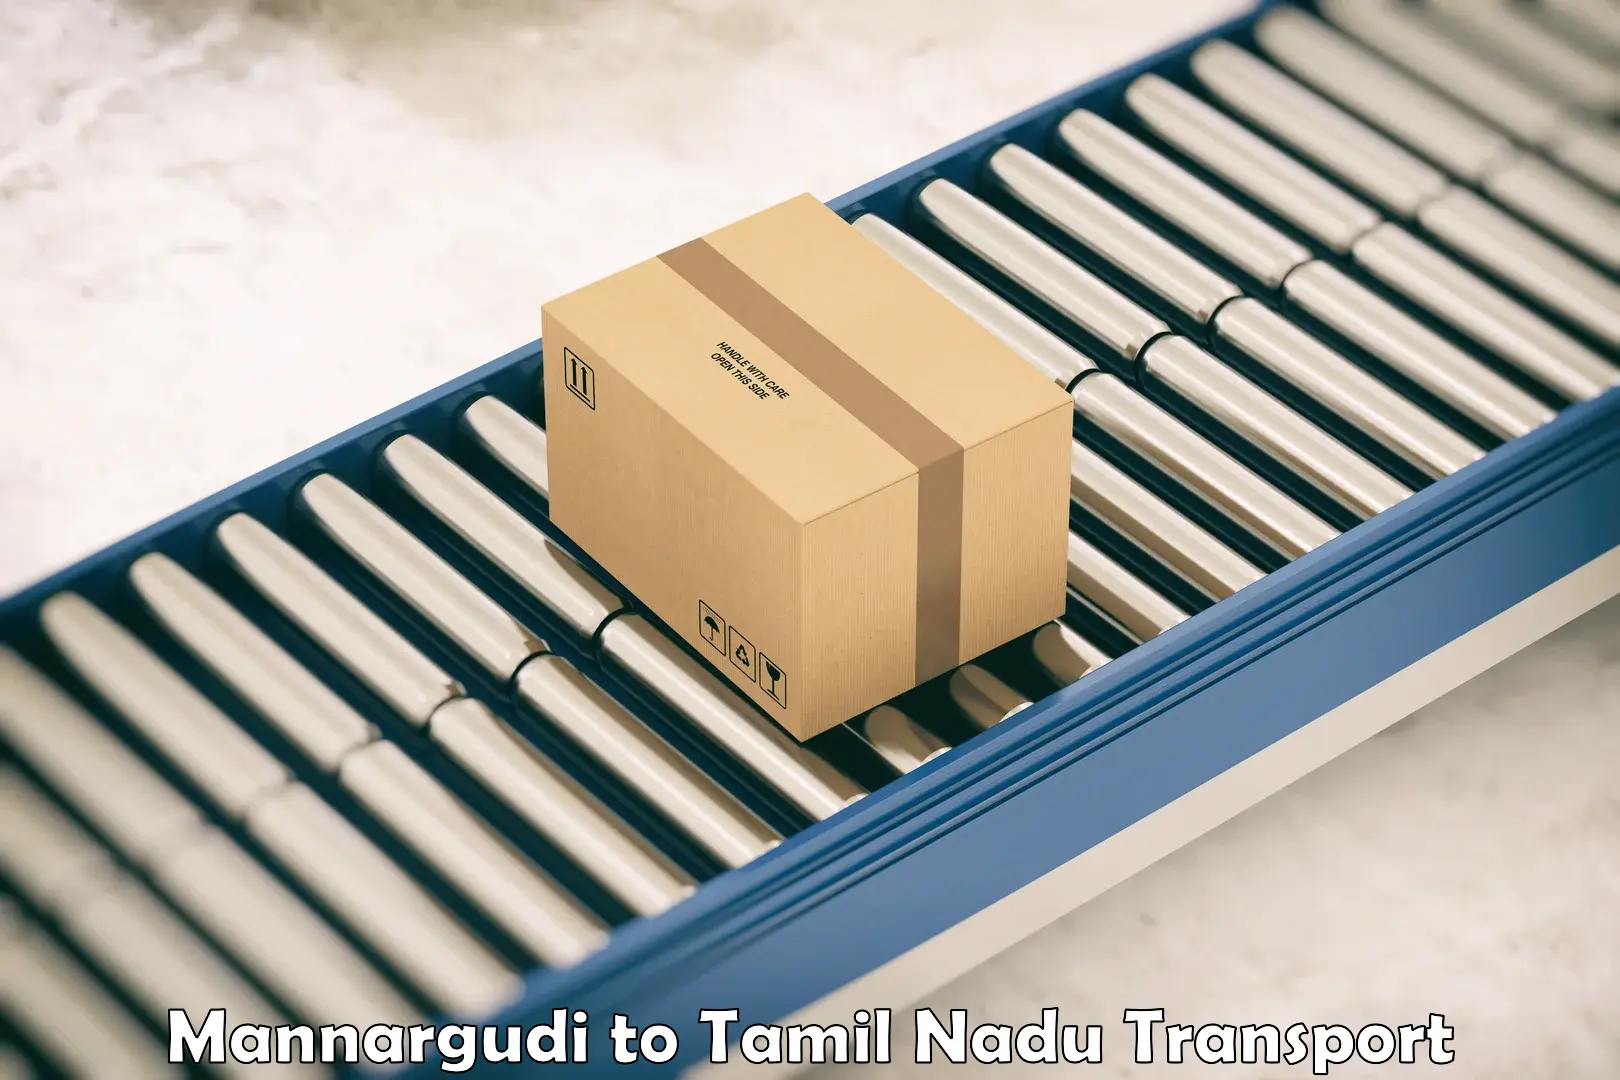 Two wheeler parcel service in Mannargudi to SRM Institute of Science and Technology Chennai